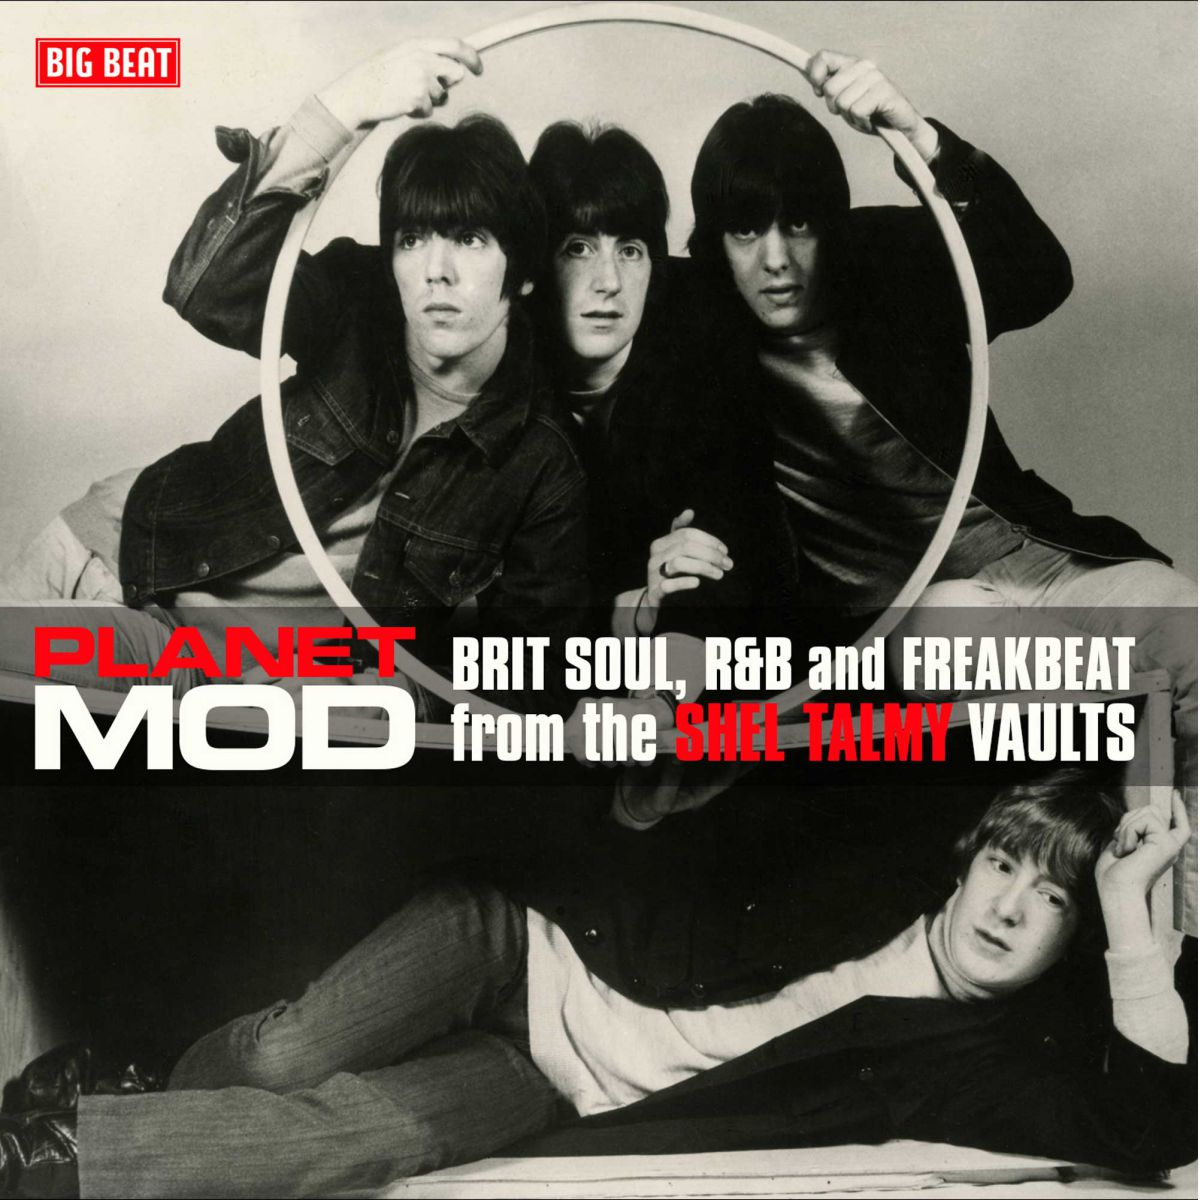 V.A.(PLANET MOD BRIT SOUL, R&B AND FREAKBEAT FROM THE SHEL TALMY VAULTS) / PLANET MOD BRIT SOUL, R&B AND FREAKBEAT FROM THE SHEL TALMY VAULTS (LP)